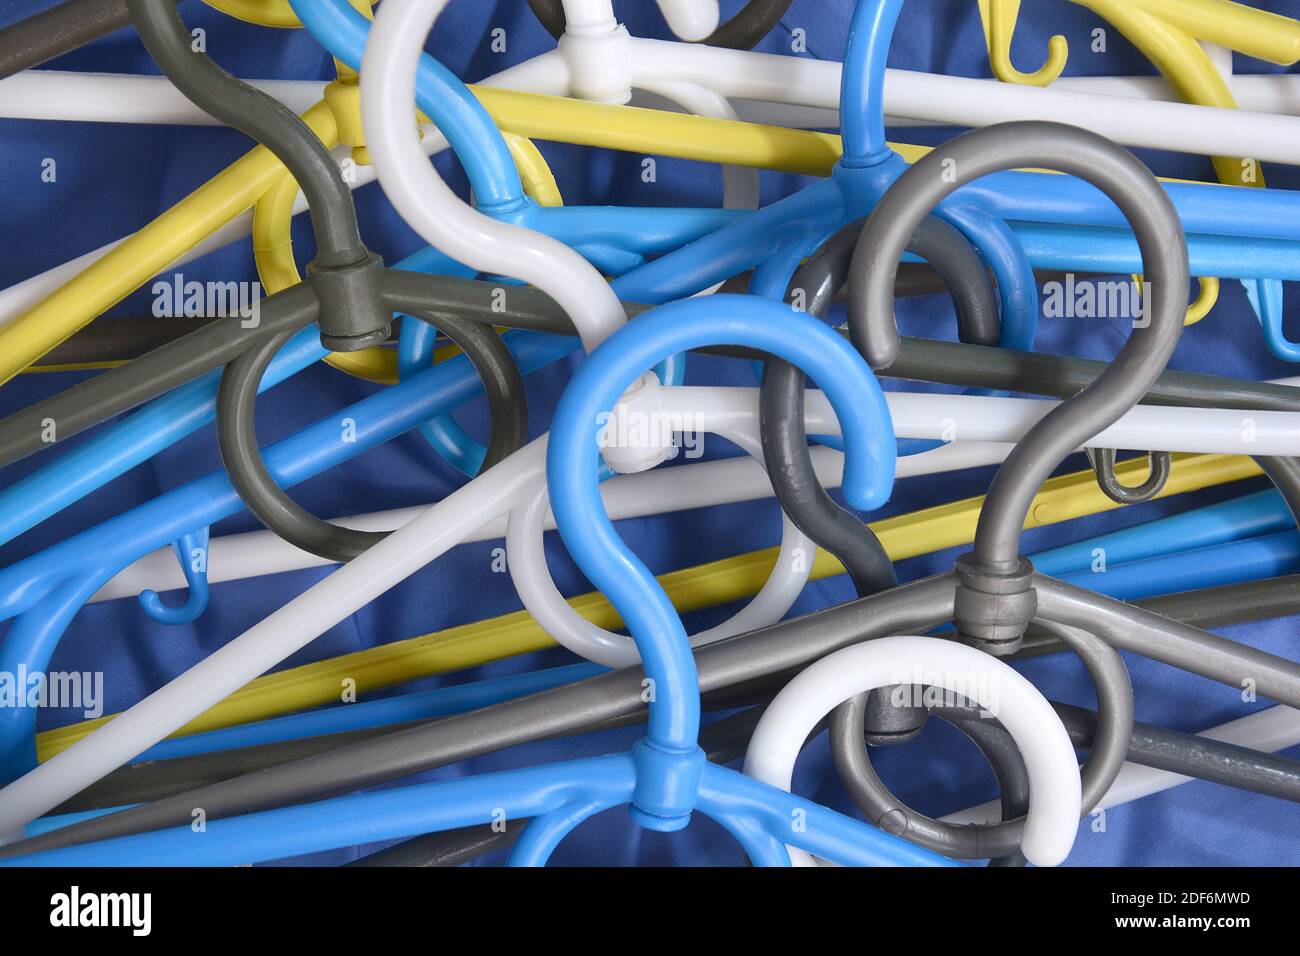 Many clothes hanger. Trempel on a blue background. Store concept for sale, design. Empty hanger set. Stock Photo